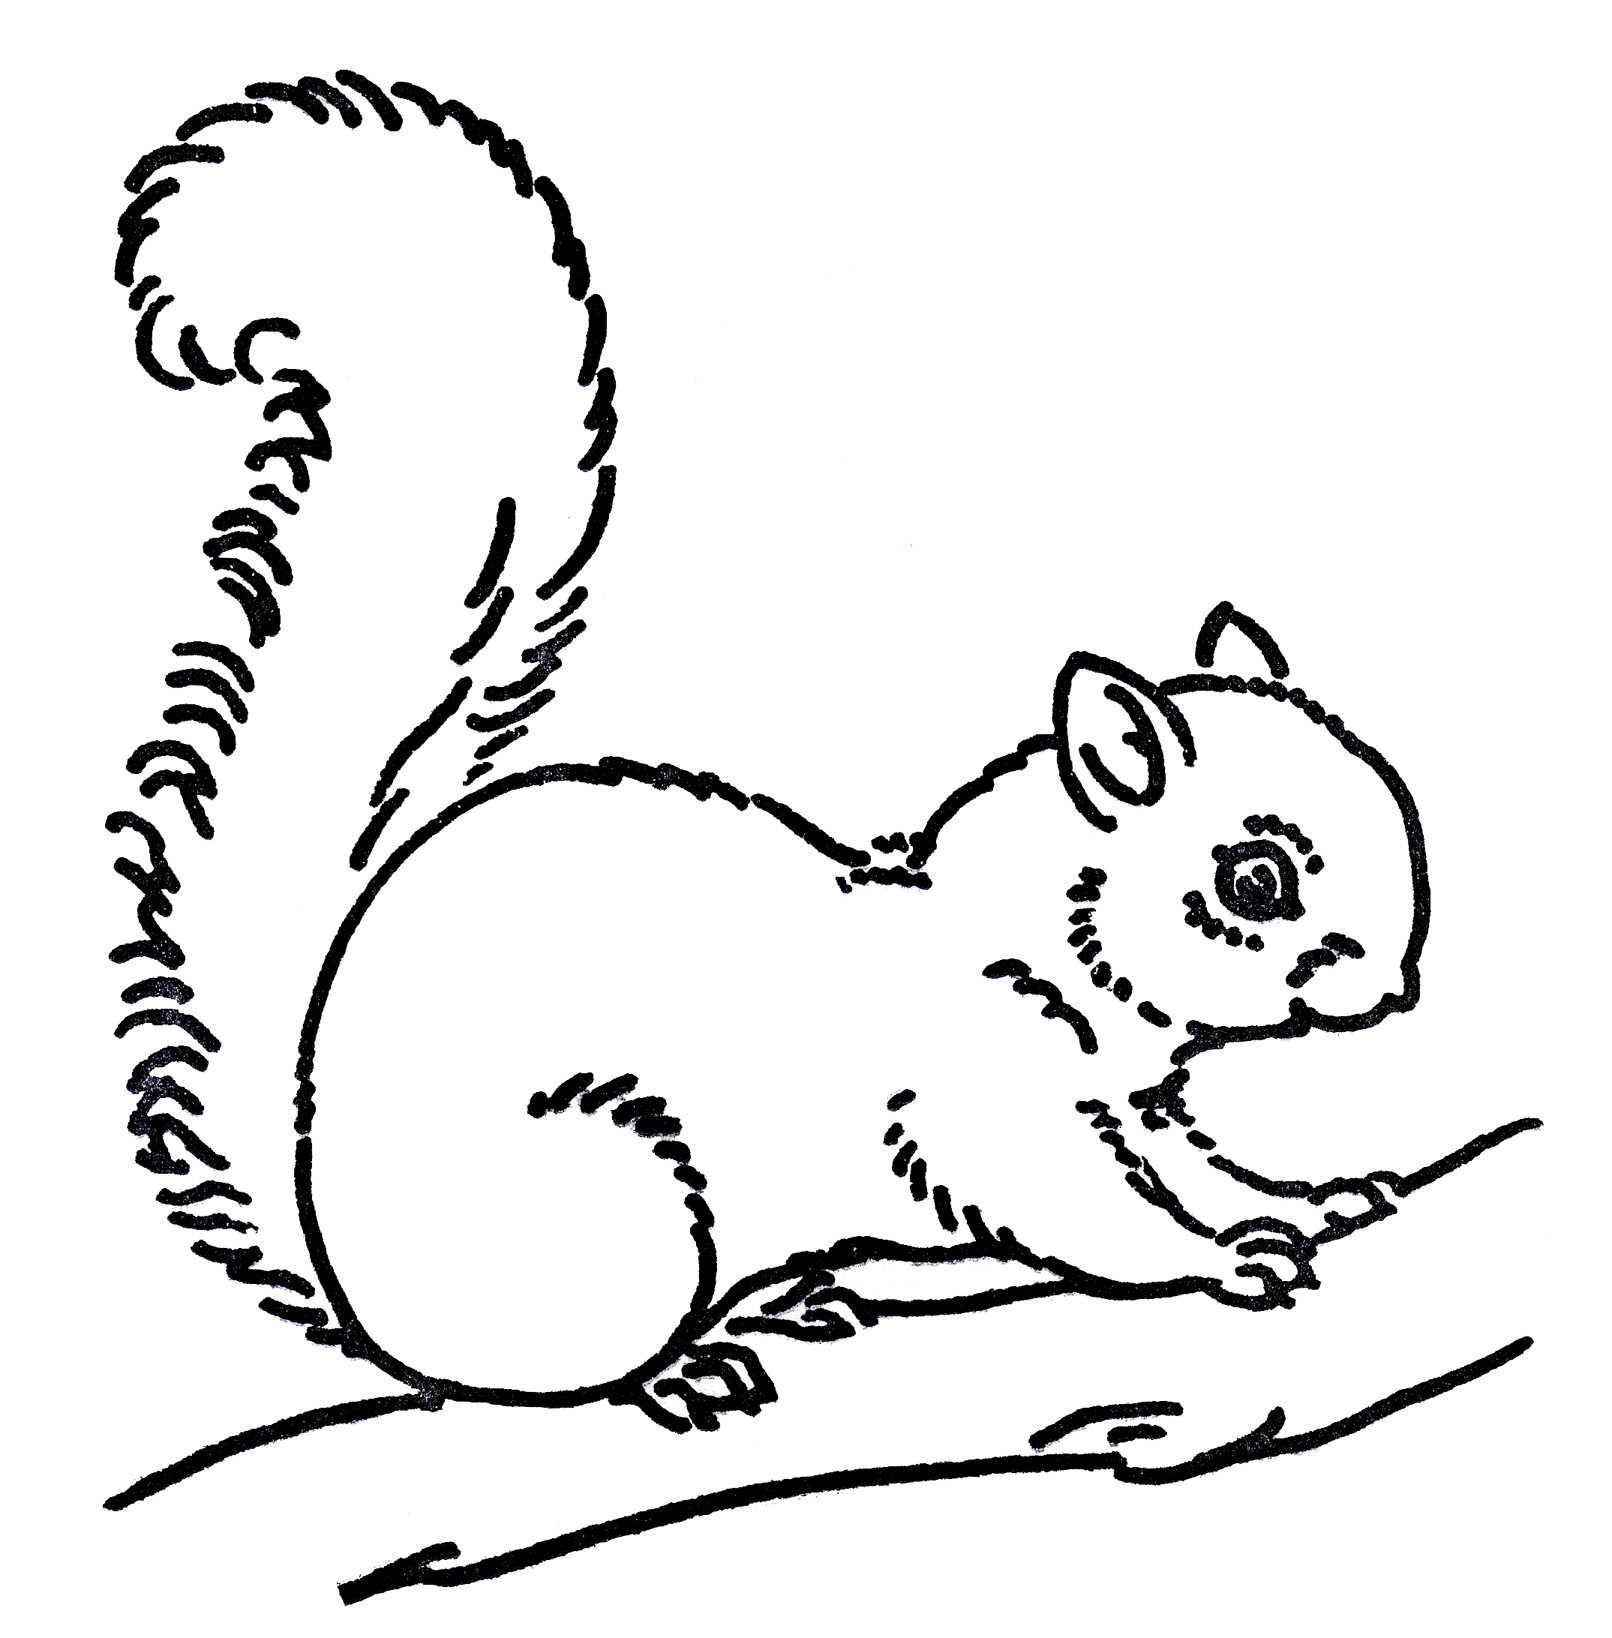 Squirrel  black and white squirrel clip art black and white free clipart 3